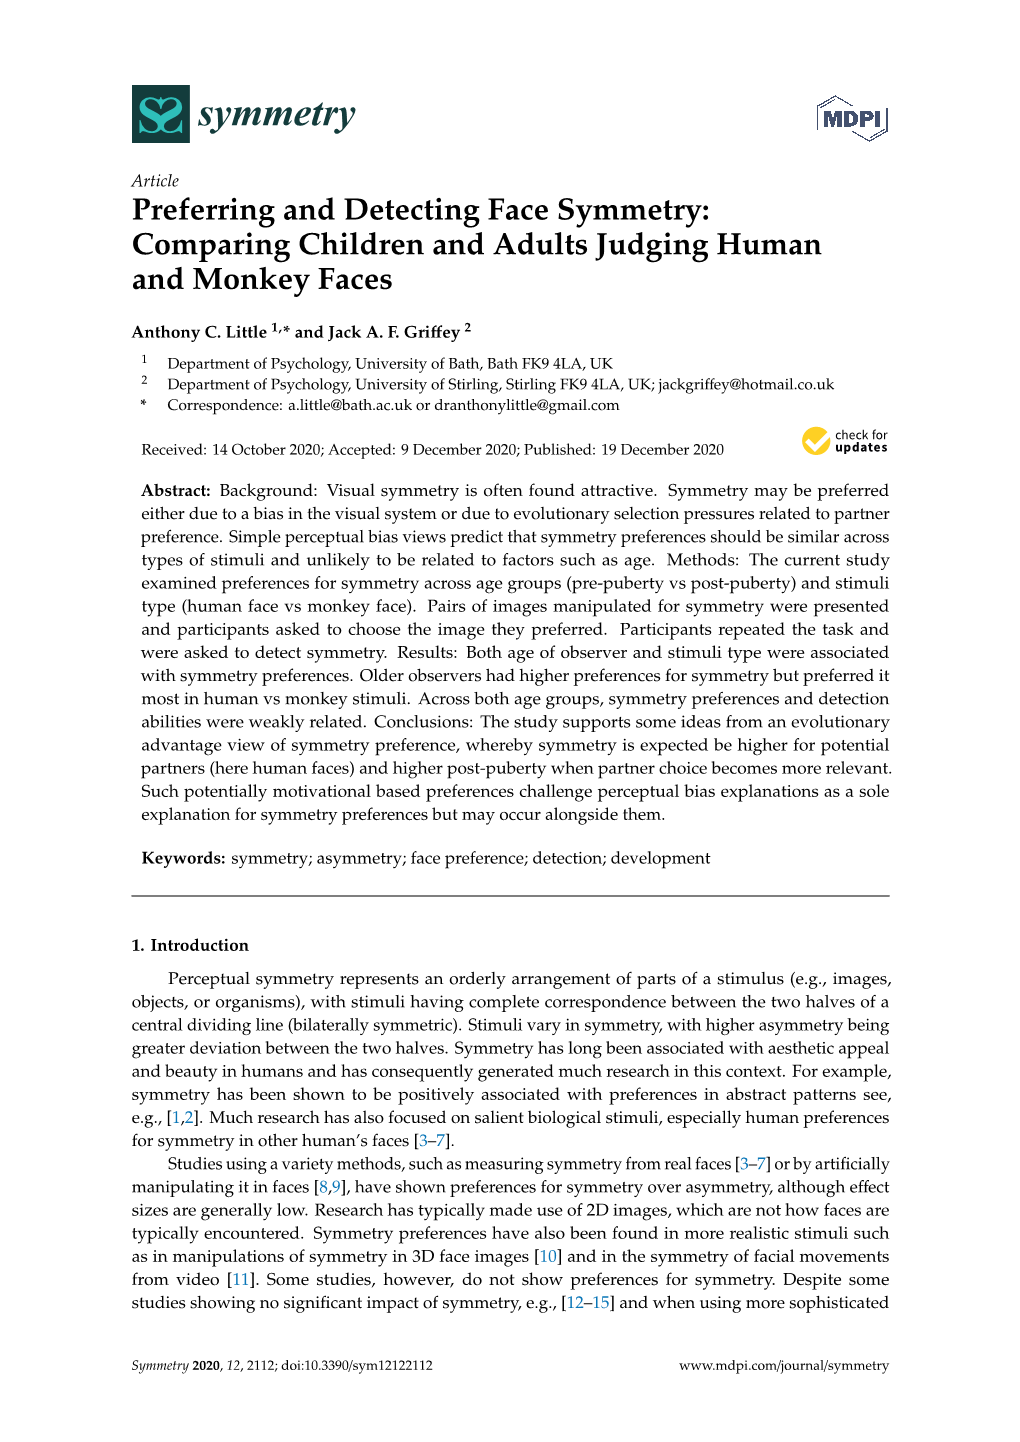 Preferring and Detecting Face Symmetry: Comparing Children and Adults Judging Human and Monkey Faces